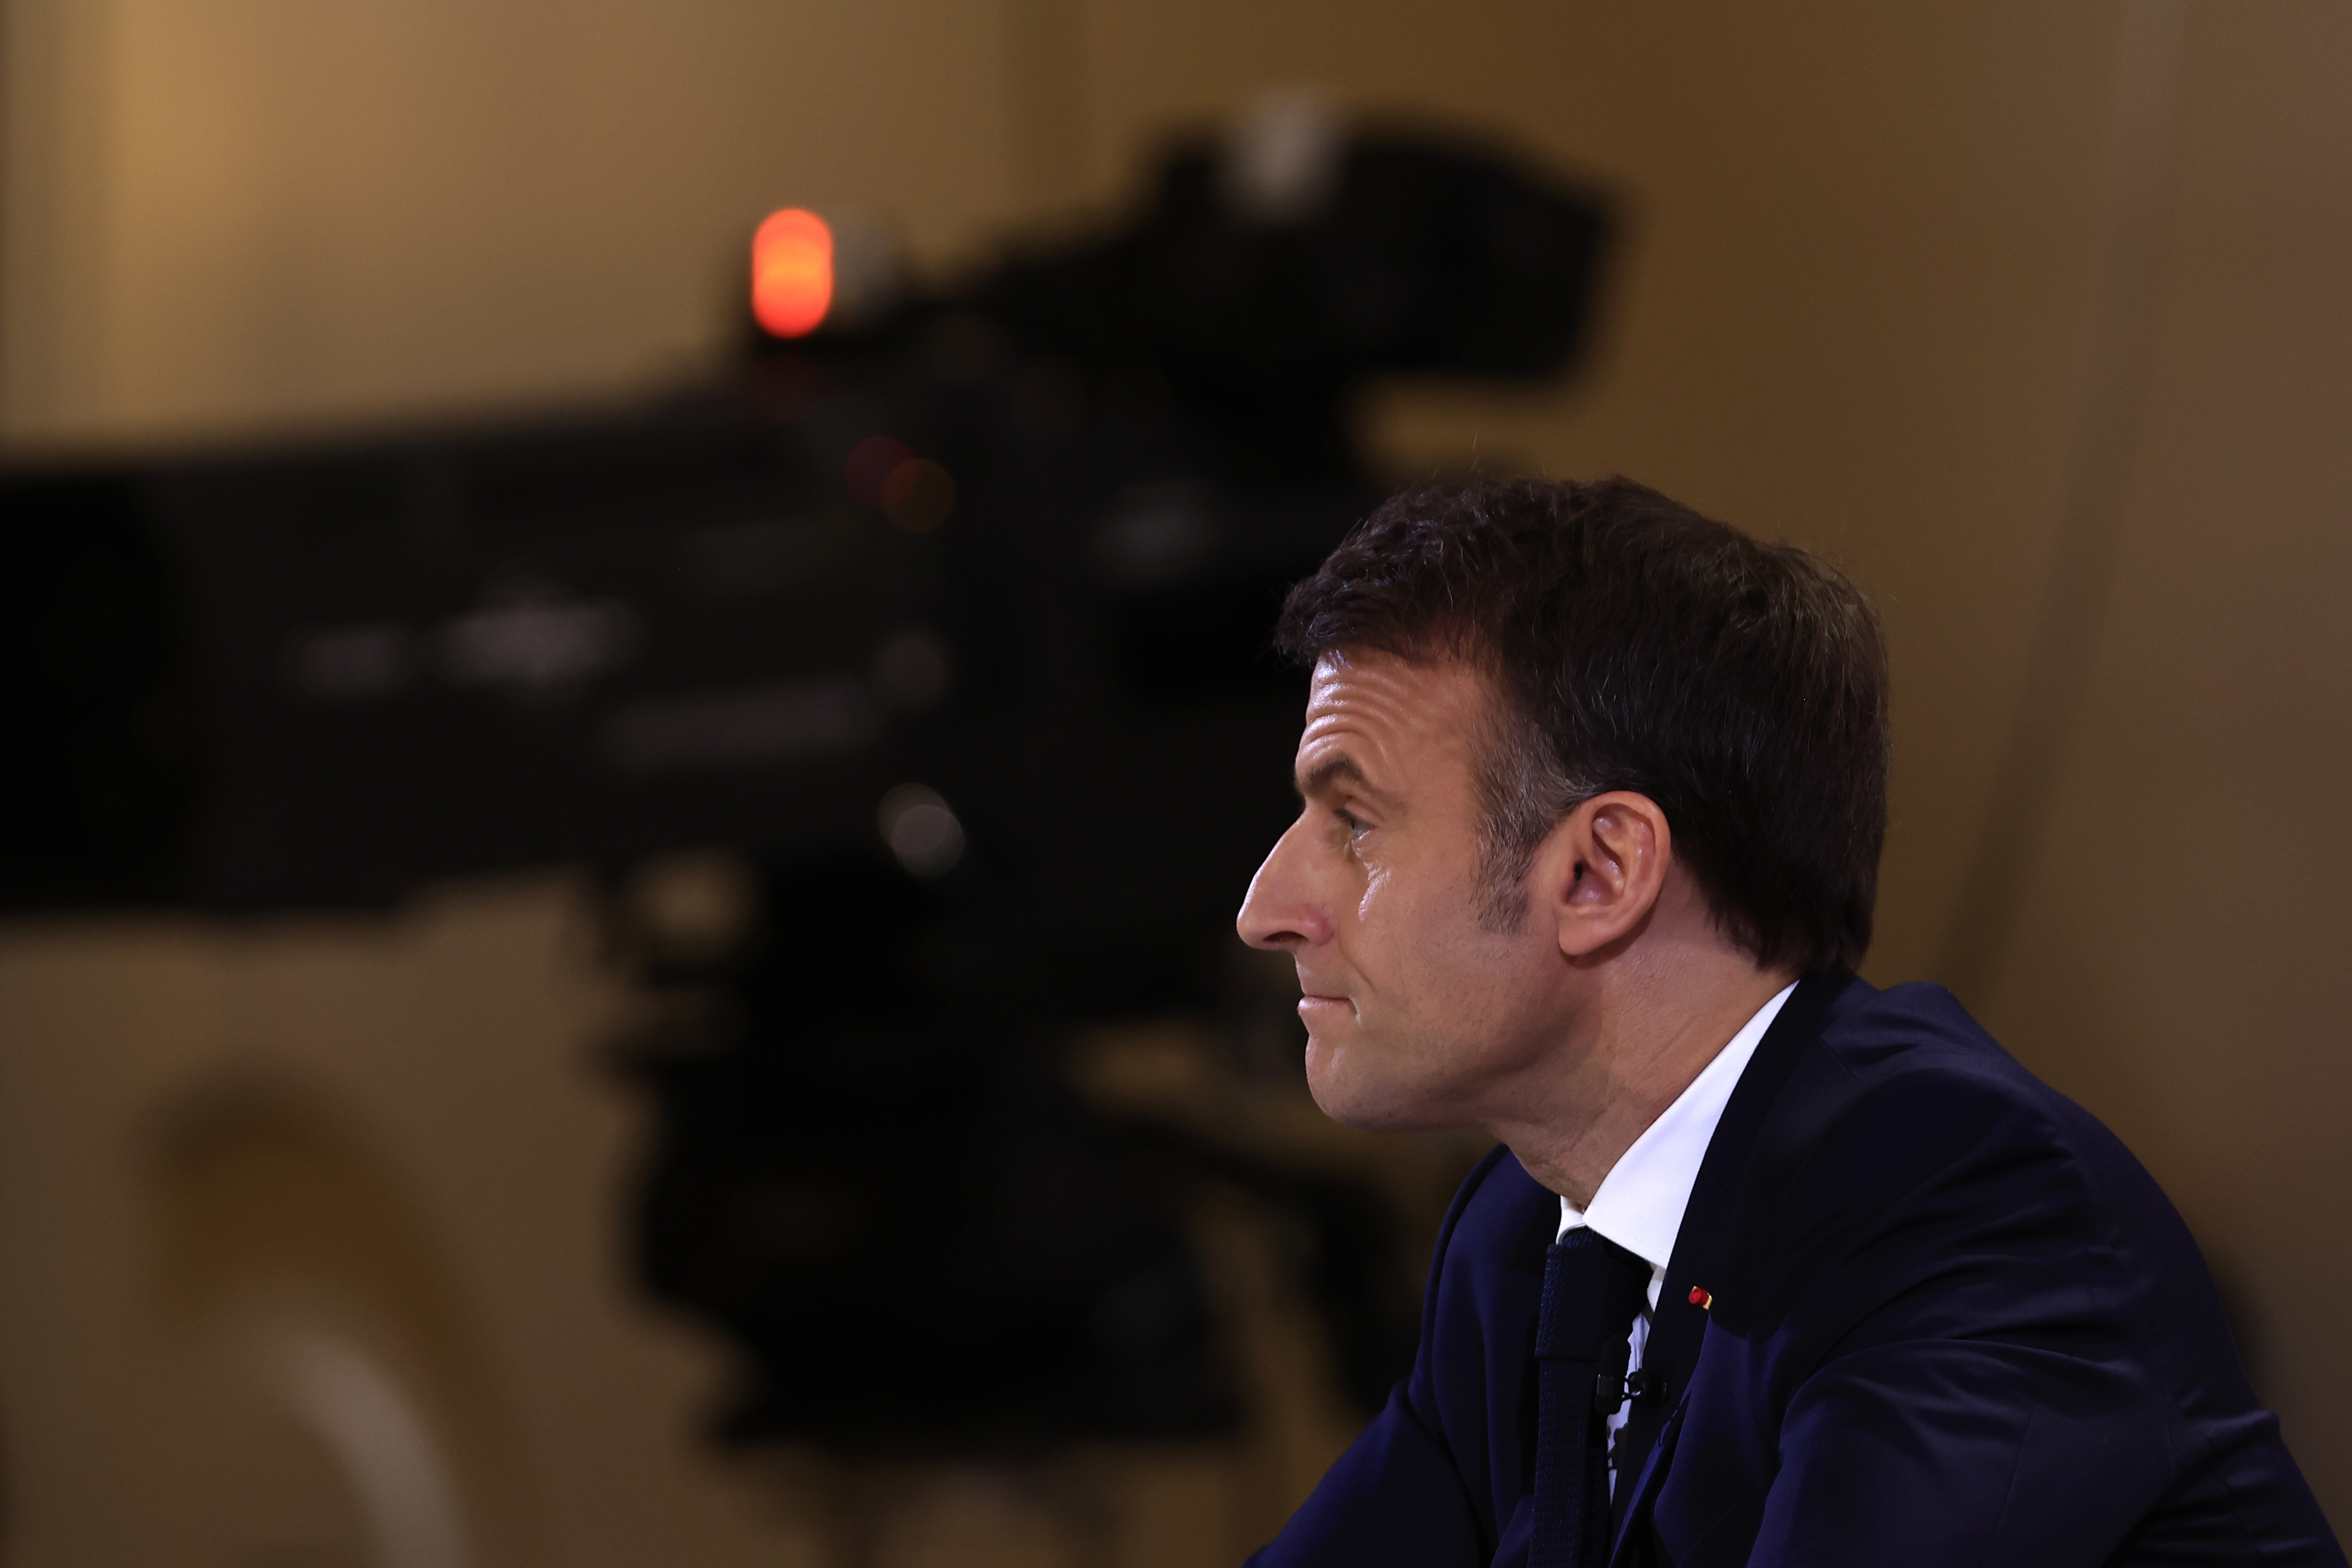 France Diplomacy 🇫🇷🇪🇺 on X: #UDHR 75 years ❝President @EmmanuelMacron  gave the closing speech at the event celebrating the 75th anniversary of  the Universal Declaration of Human Rights, at the same place